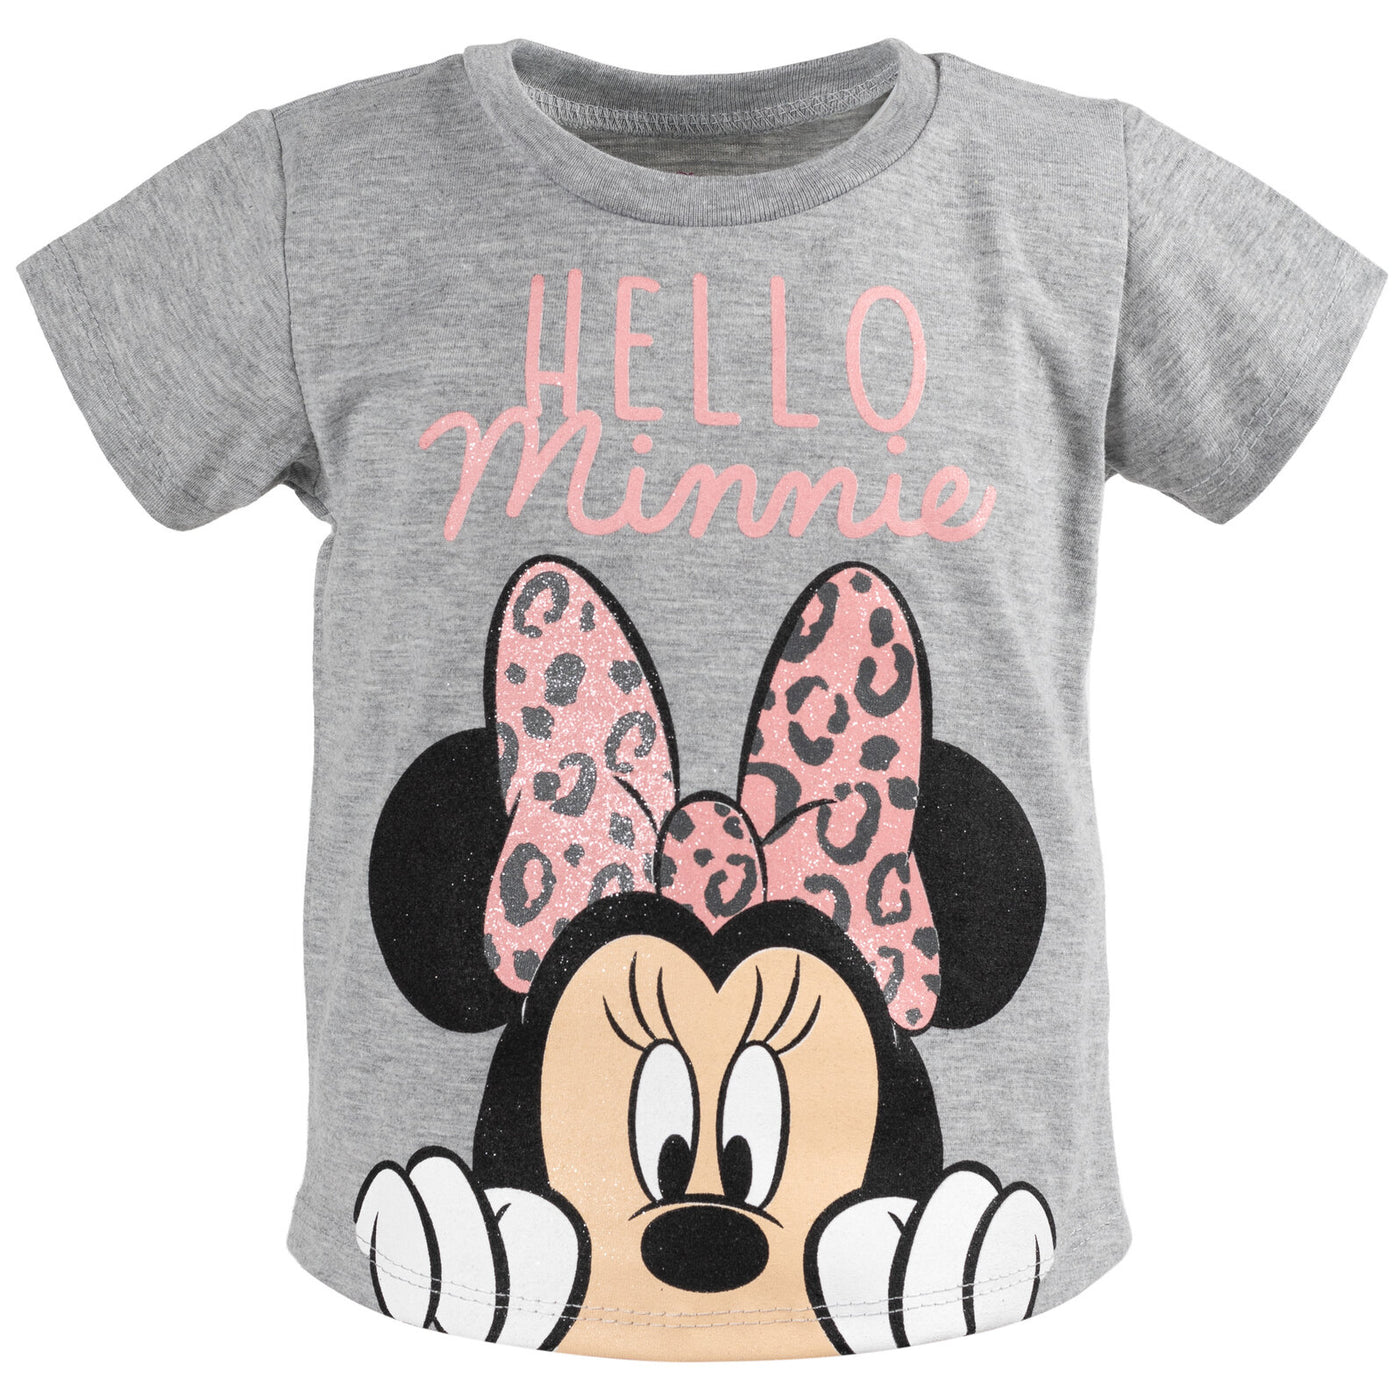 Minnie Mouse T-Shirt and French Terry Shorts Outfit Set